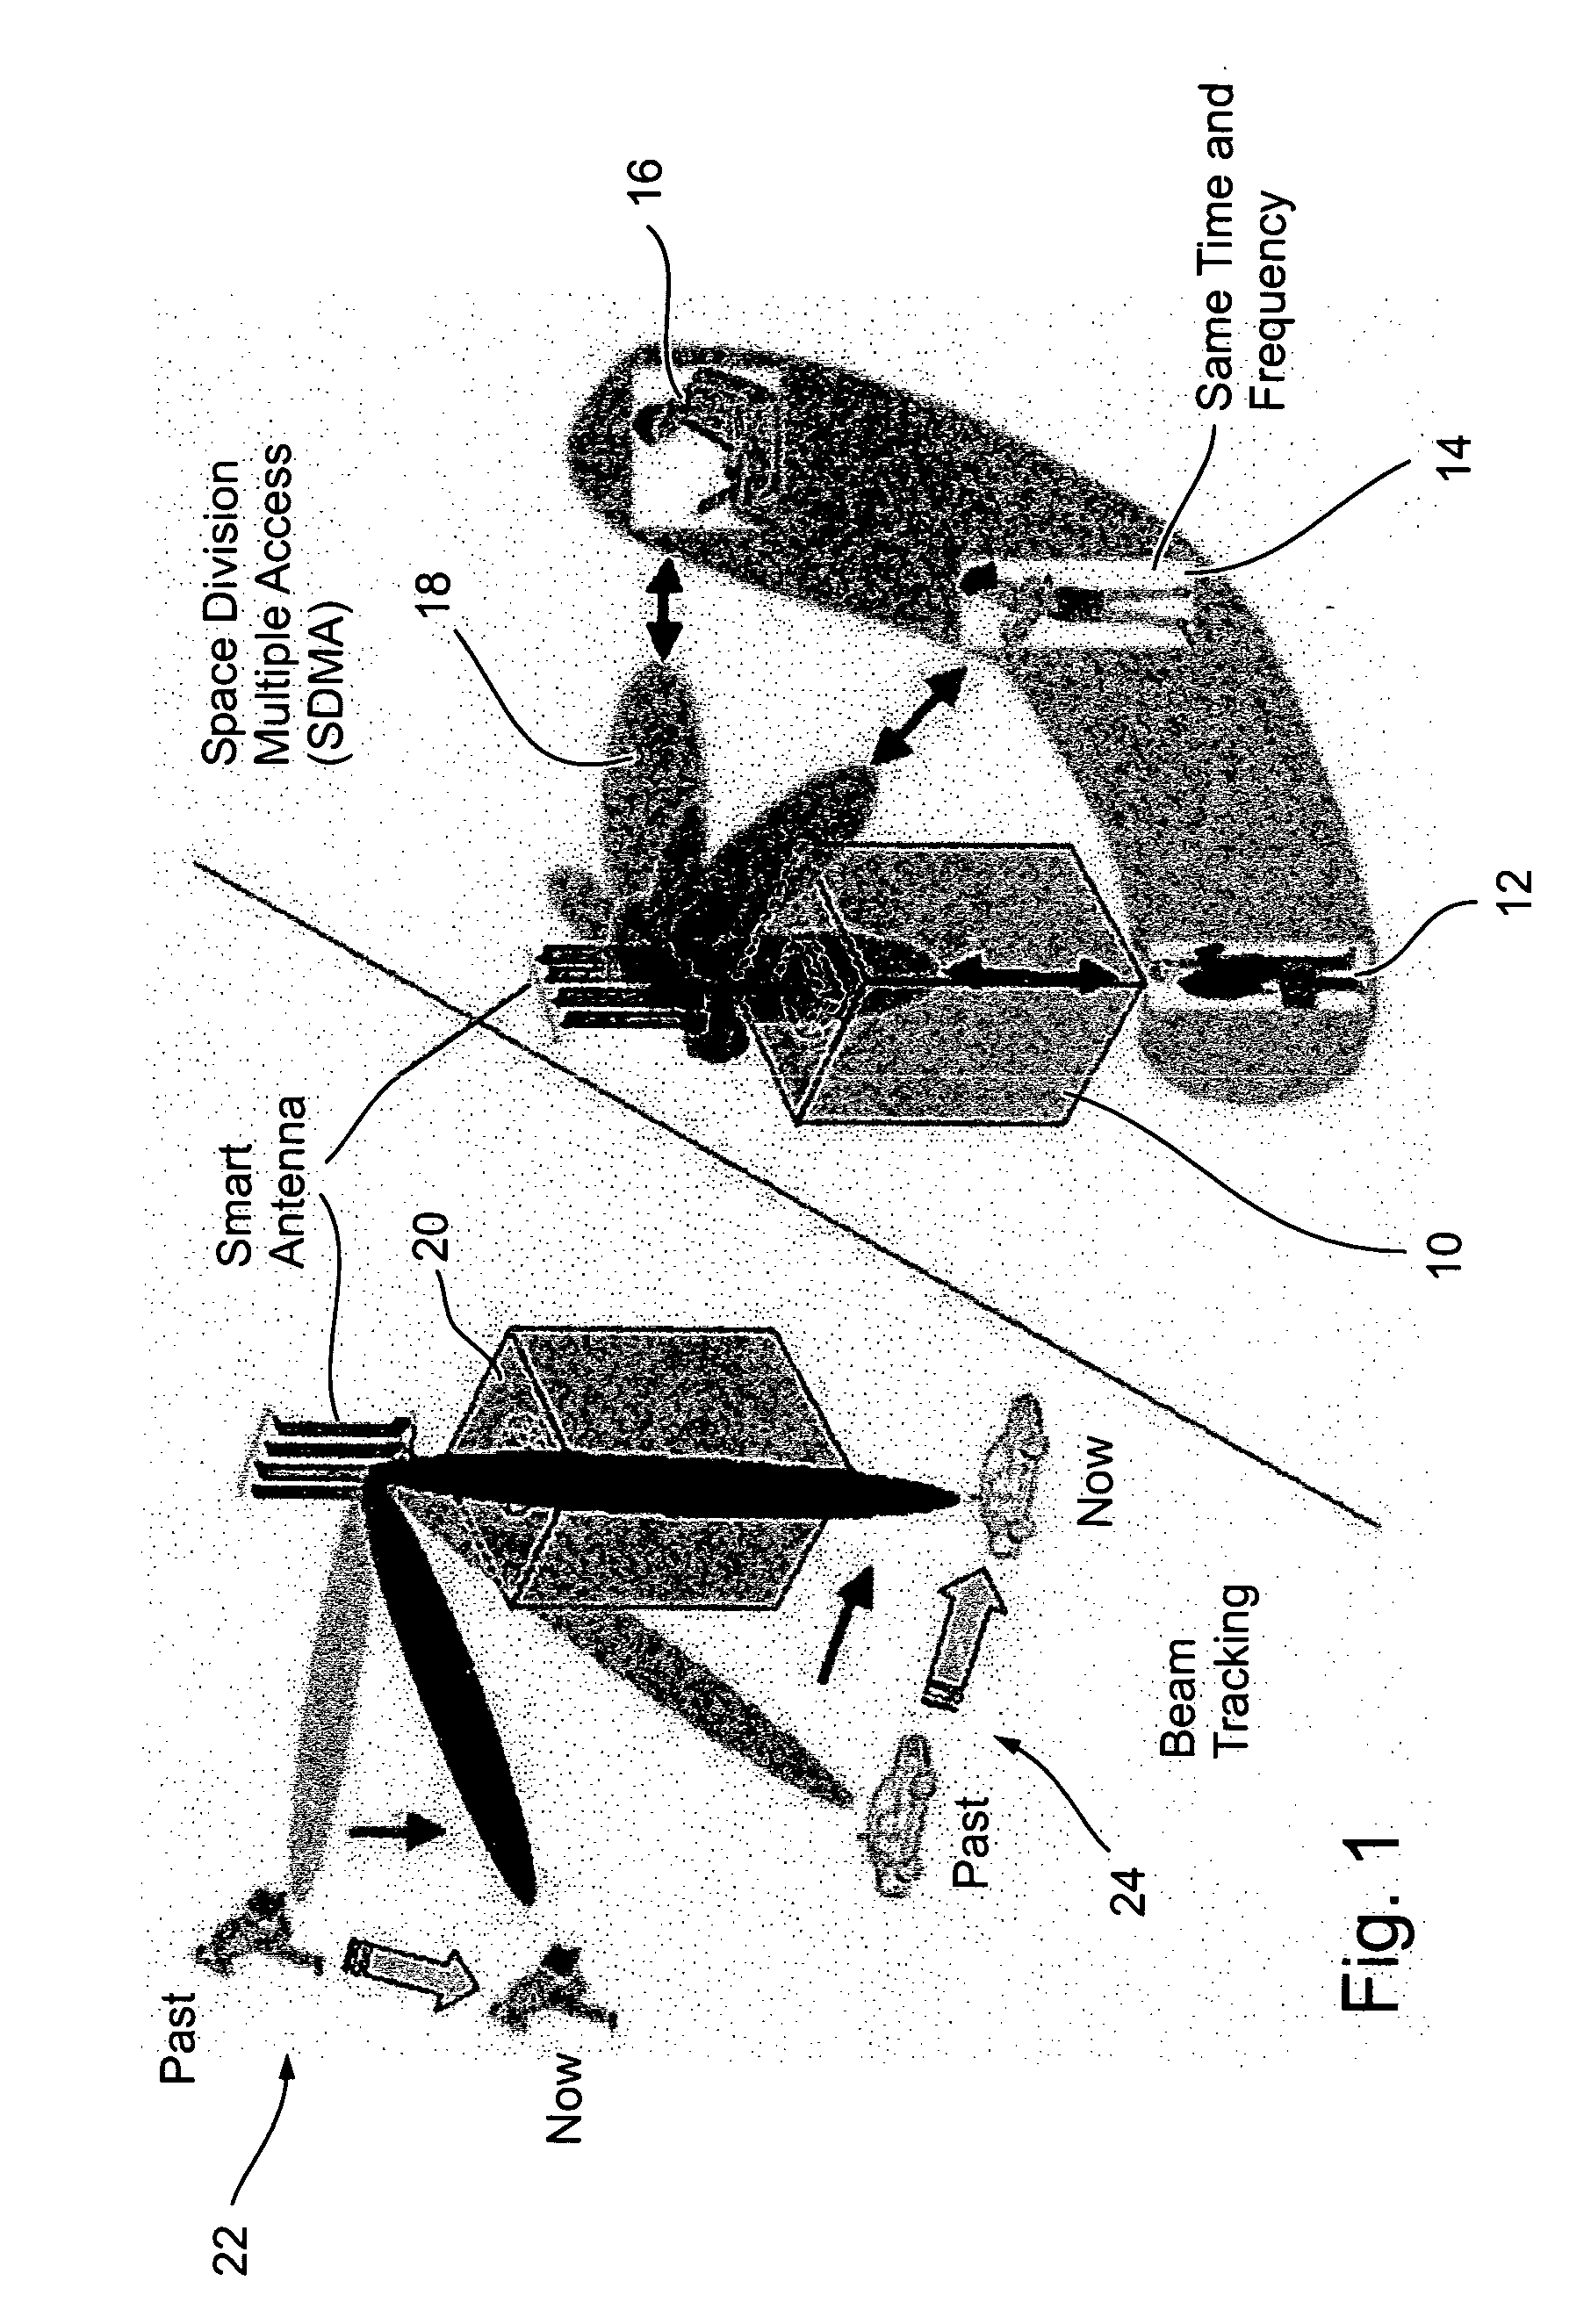 Smart antenna system with improved localization of polarized sources